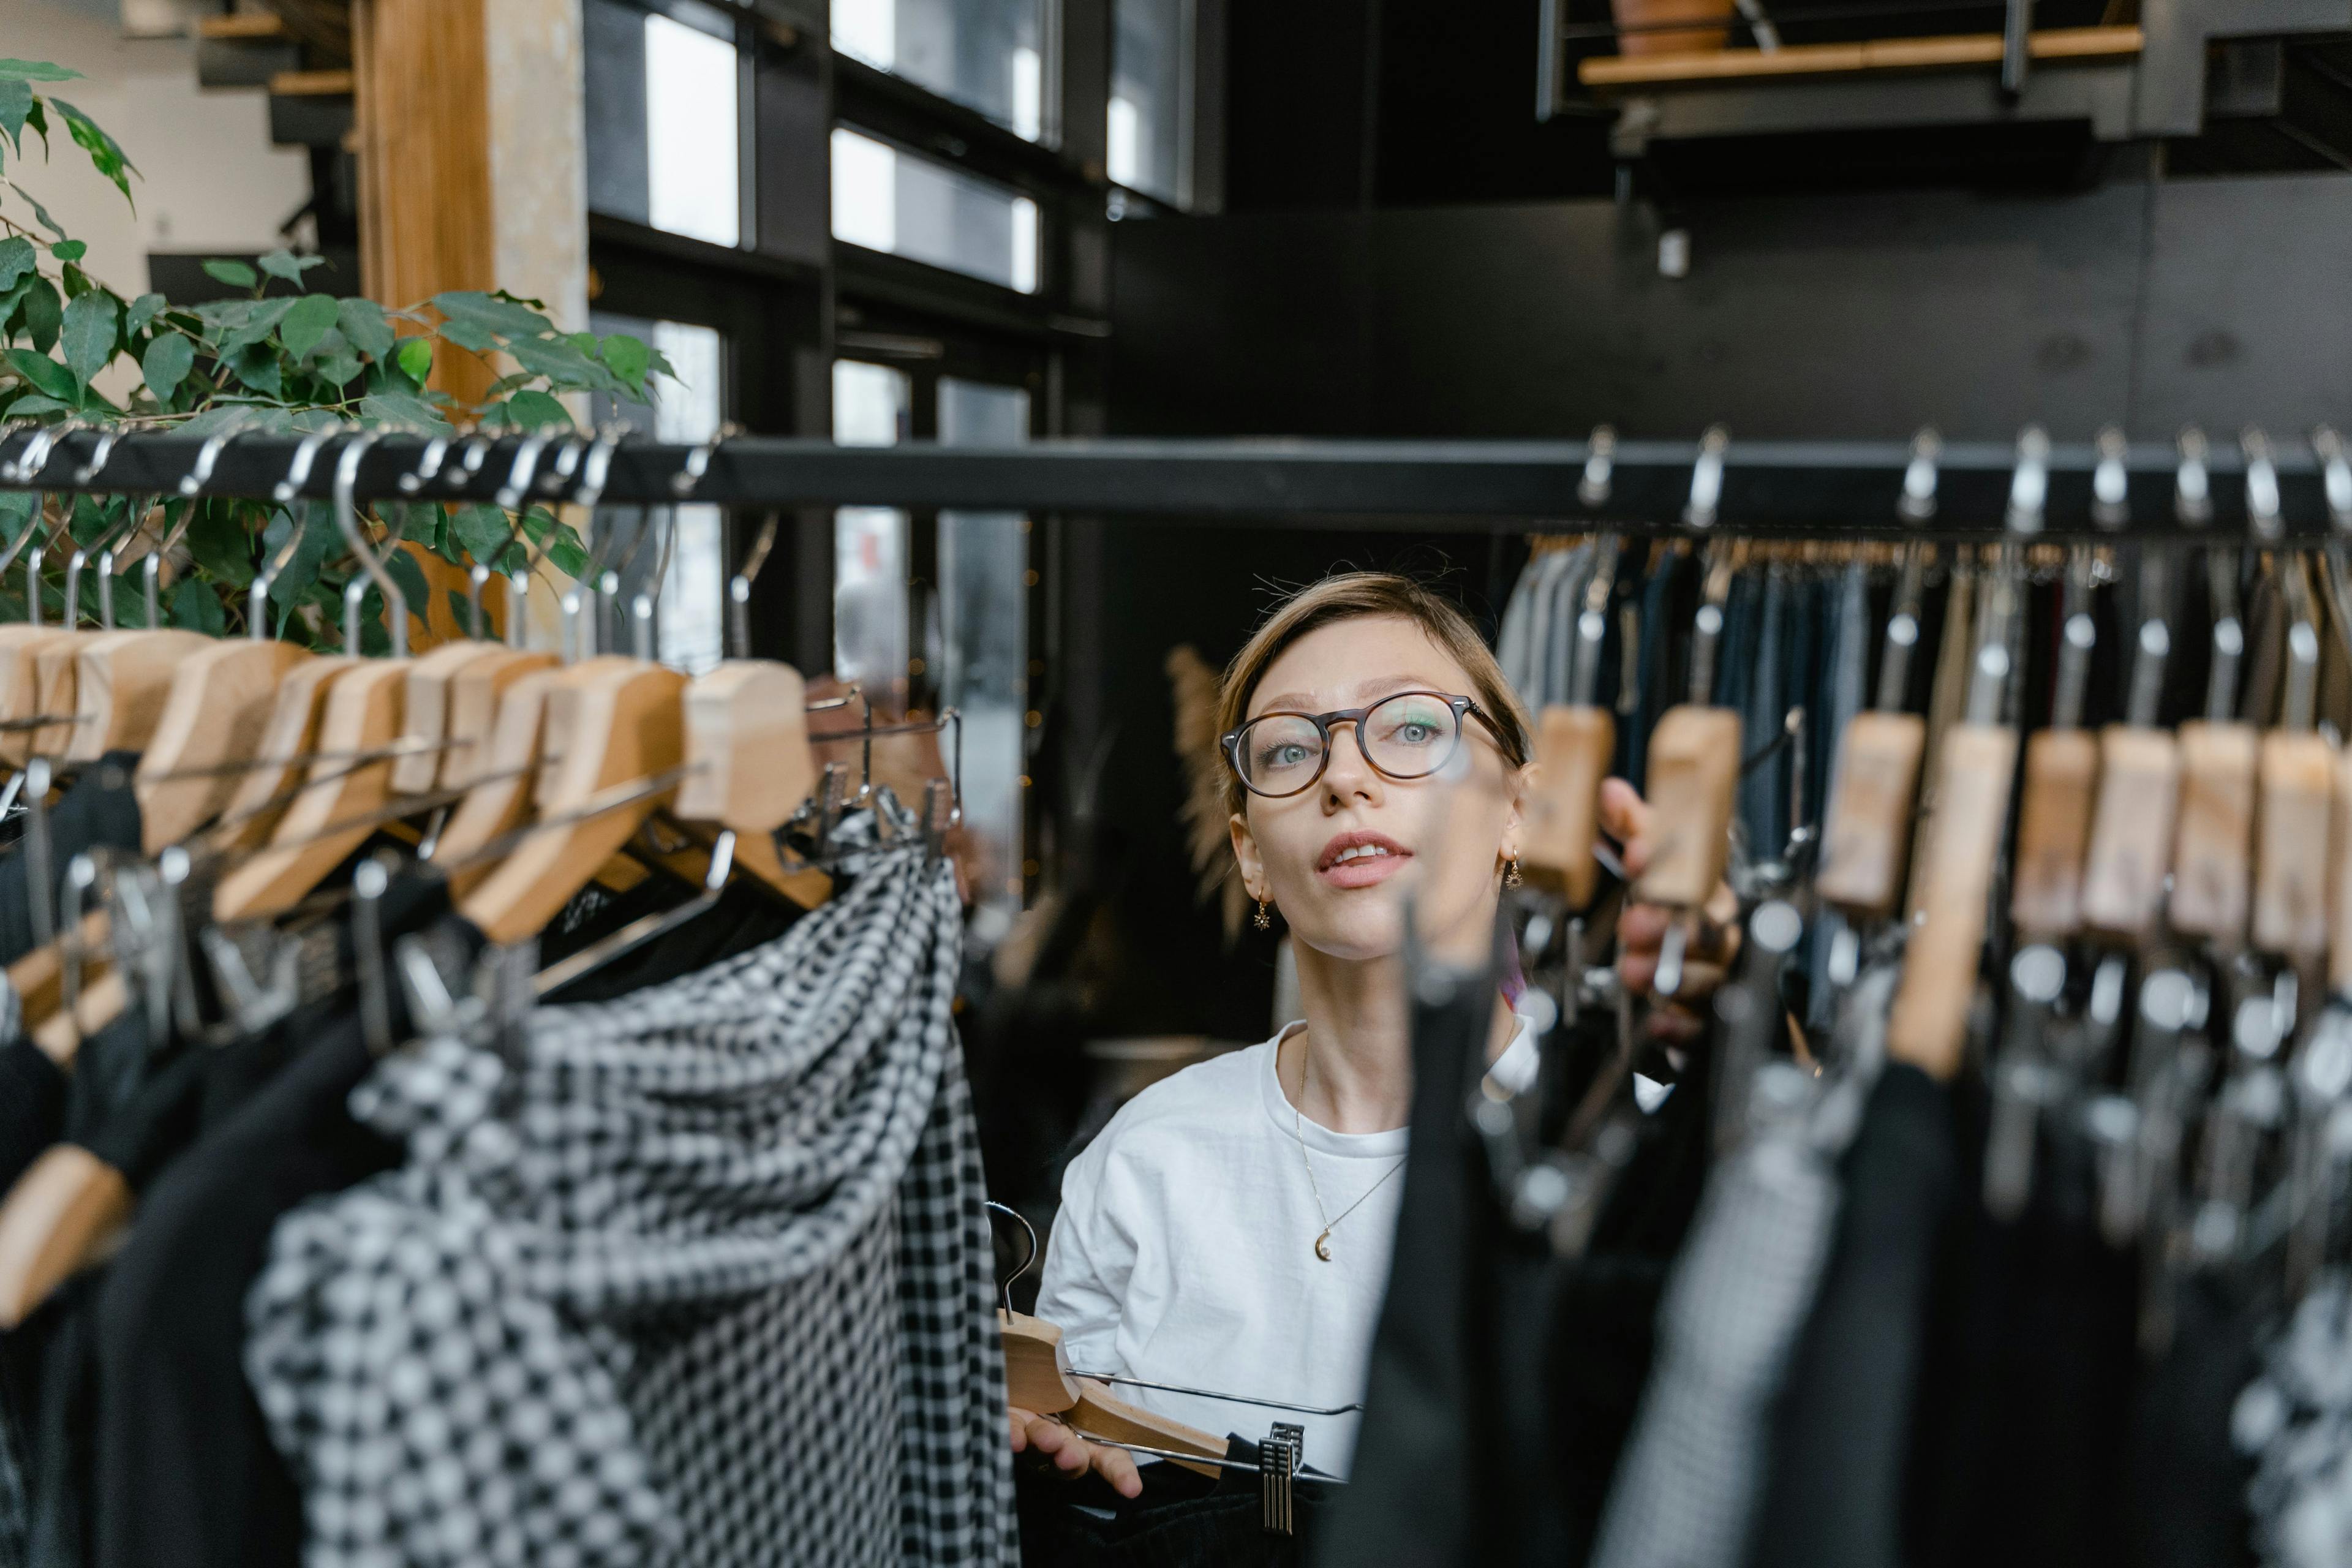 Woman Adding More Clothes on the Clothes Rack in a luxurious retail store